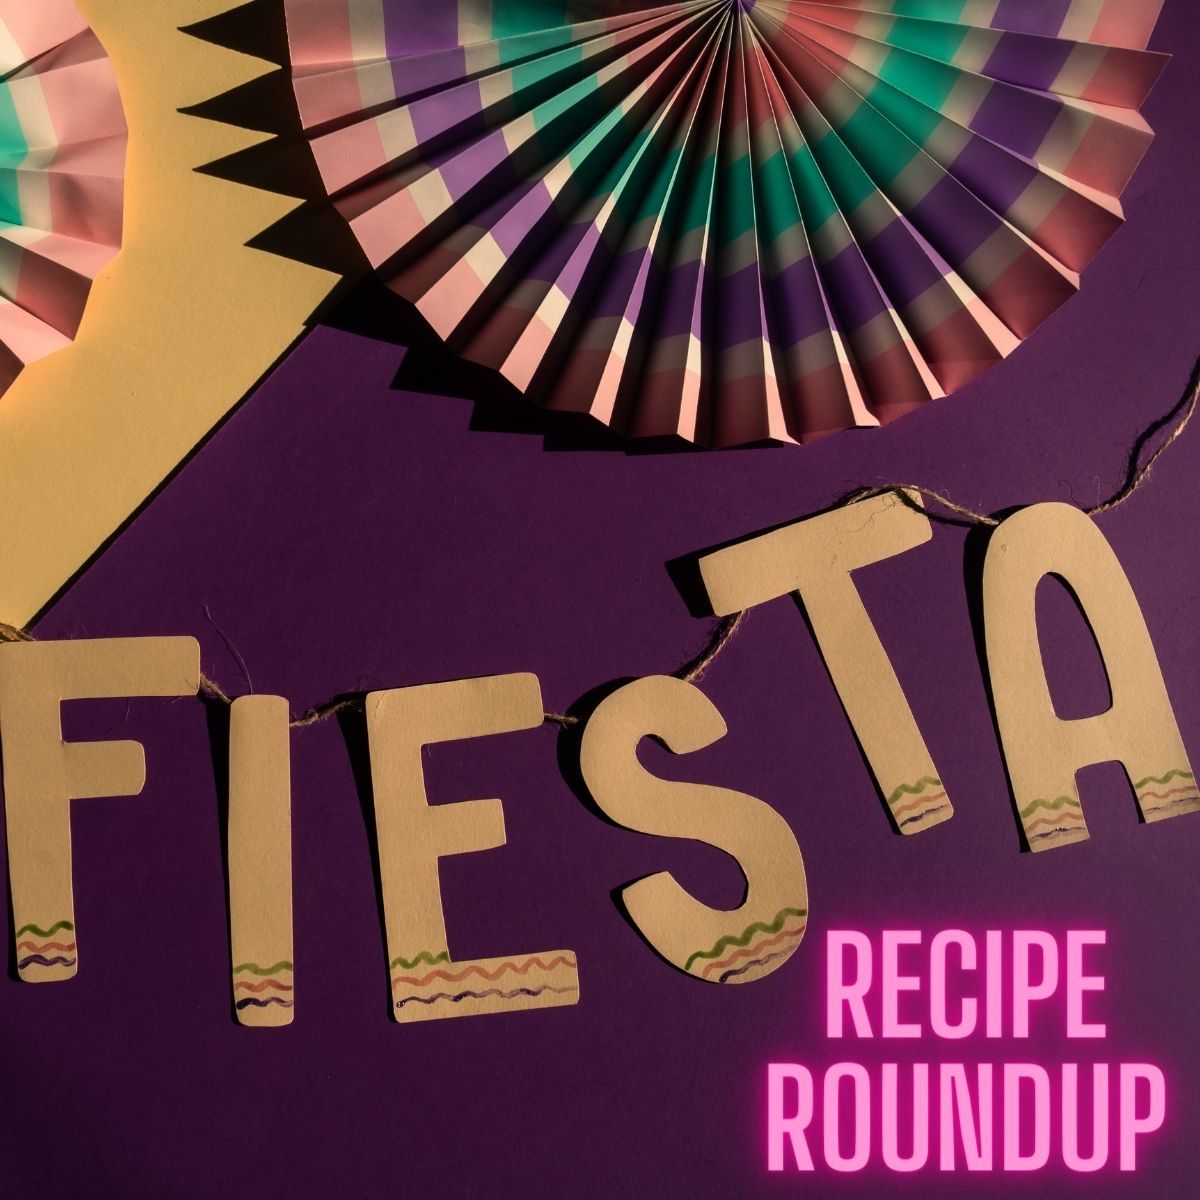 Overhead view of paper fans and a banner that says 'fiesta' with the words 'recipe roundup' in glowing text